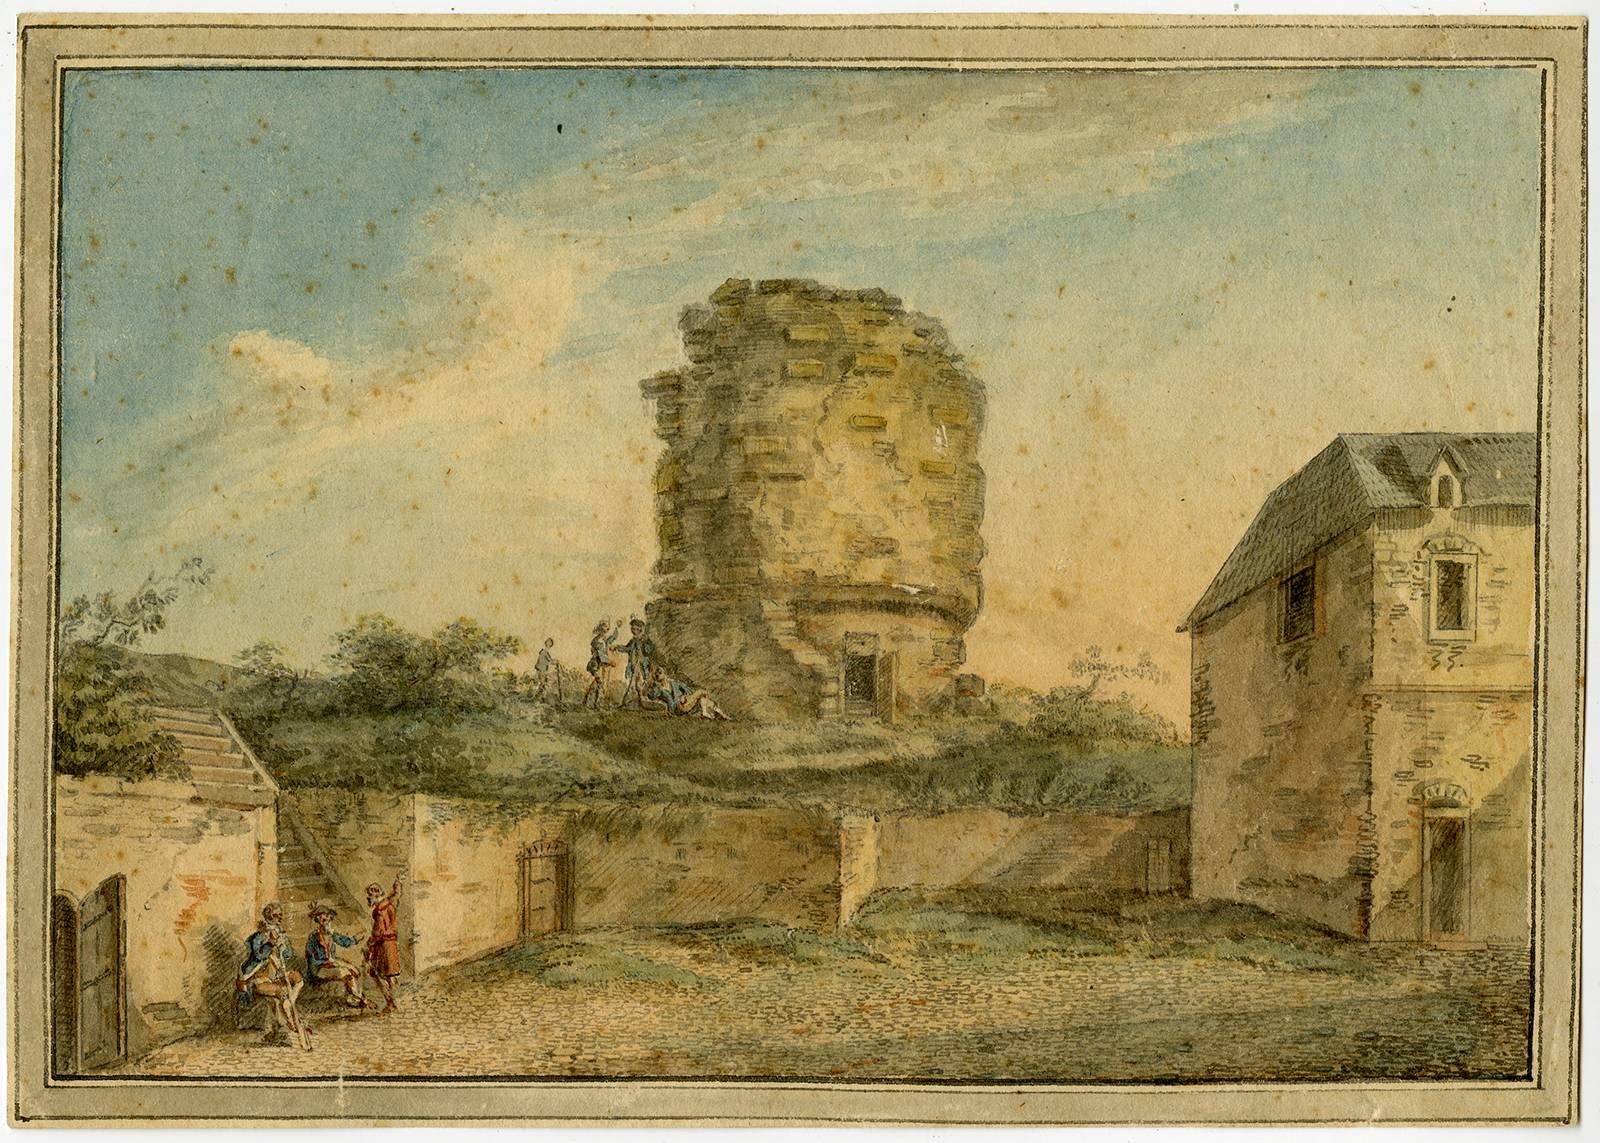 Unknown Landscape Art – Untitled - View of an old citywall with ruined tower. Two groups of figures.